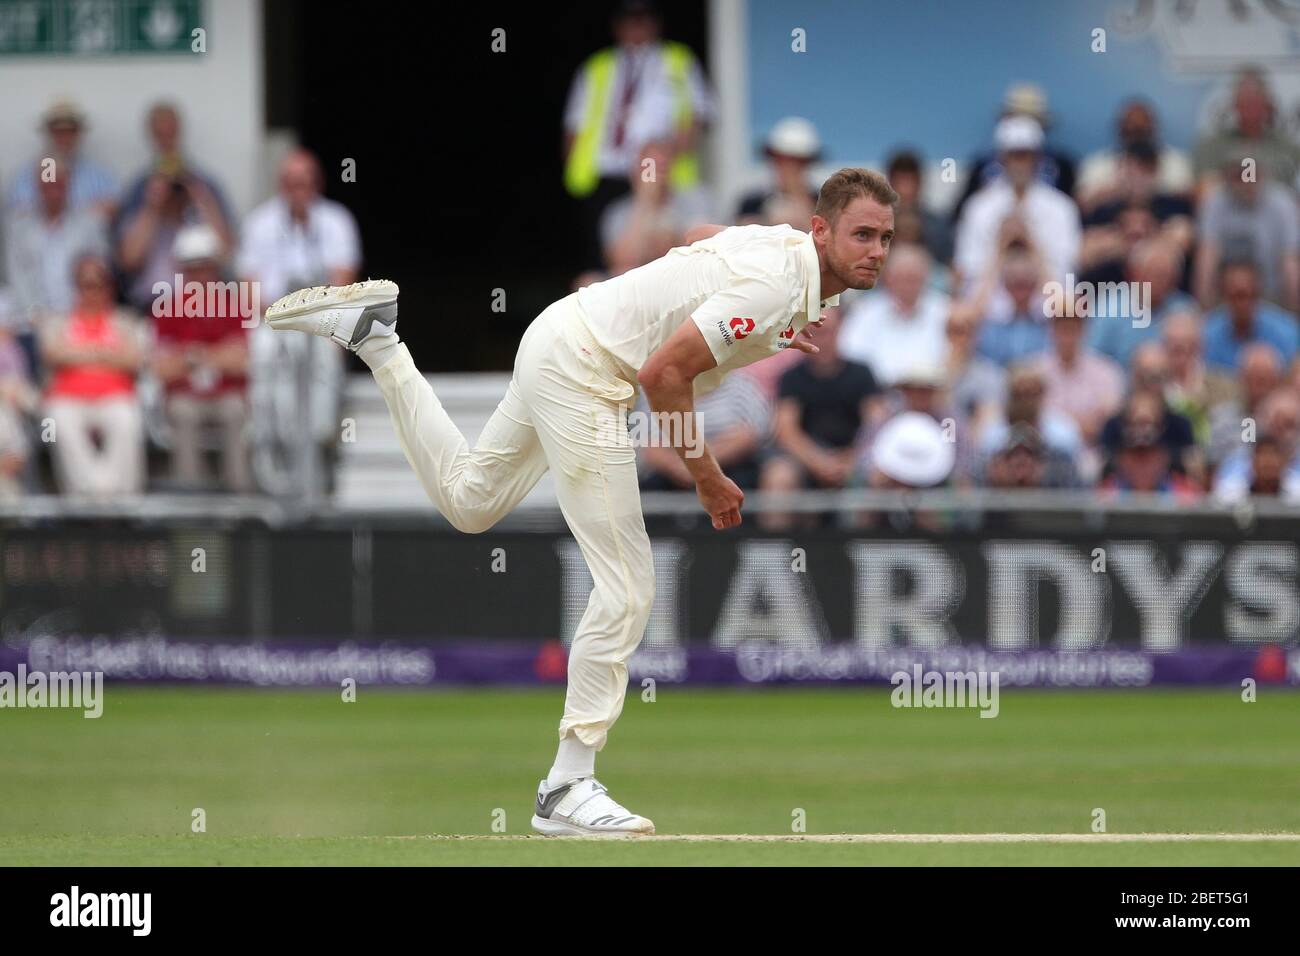 LEEDS, UK - JUNE 3rd Stuart Broad of England bowls during the third day of the Second Nat West Test match between England and Pakistan at Headingley Cricket Ground, Leeds on Sunday 3rd June 2018. (Credit: Mark Fletcher | MI News) Stock Photo